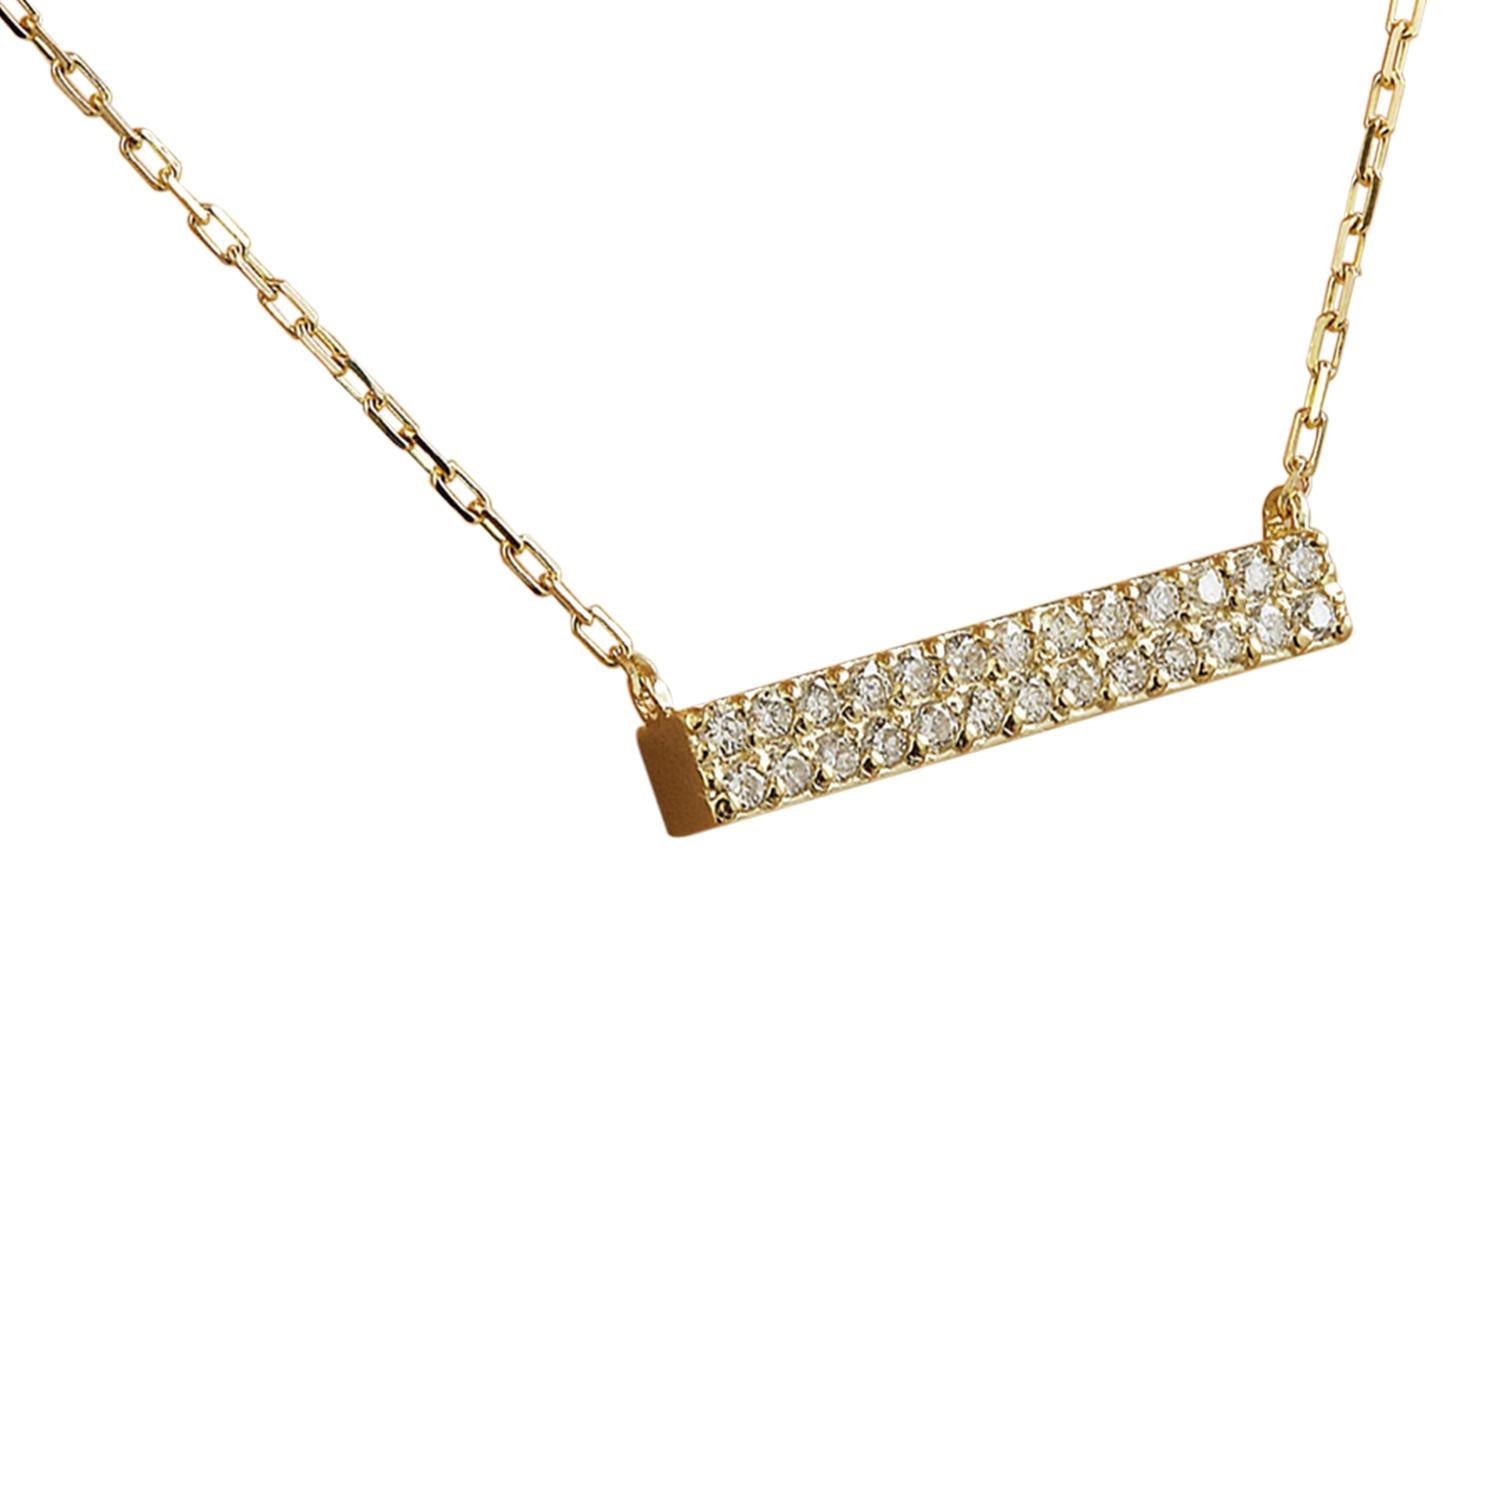 Introducing our exquisite 0.40 Carat Natural Diamond Bar Necklace in 14 Karat Yellow Gold. Stamped with 14K authenticity, this necklace weighs 2 grams and has a length of 16 inches. Adorning the necklace is a total of 26 natural diamonds, weighing